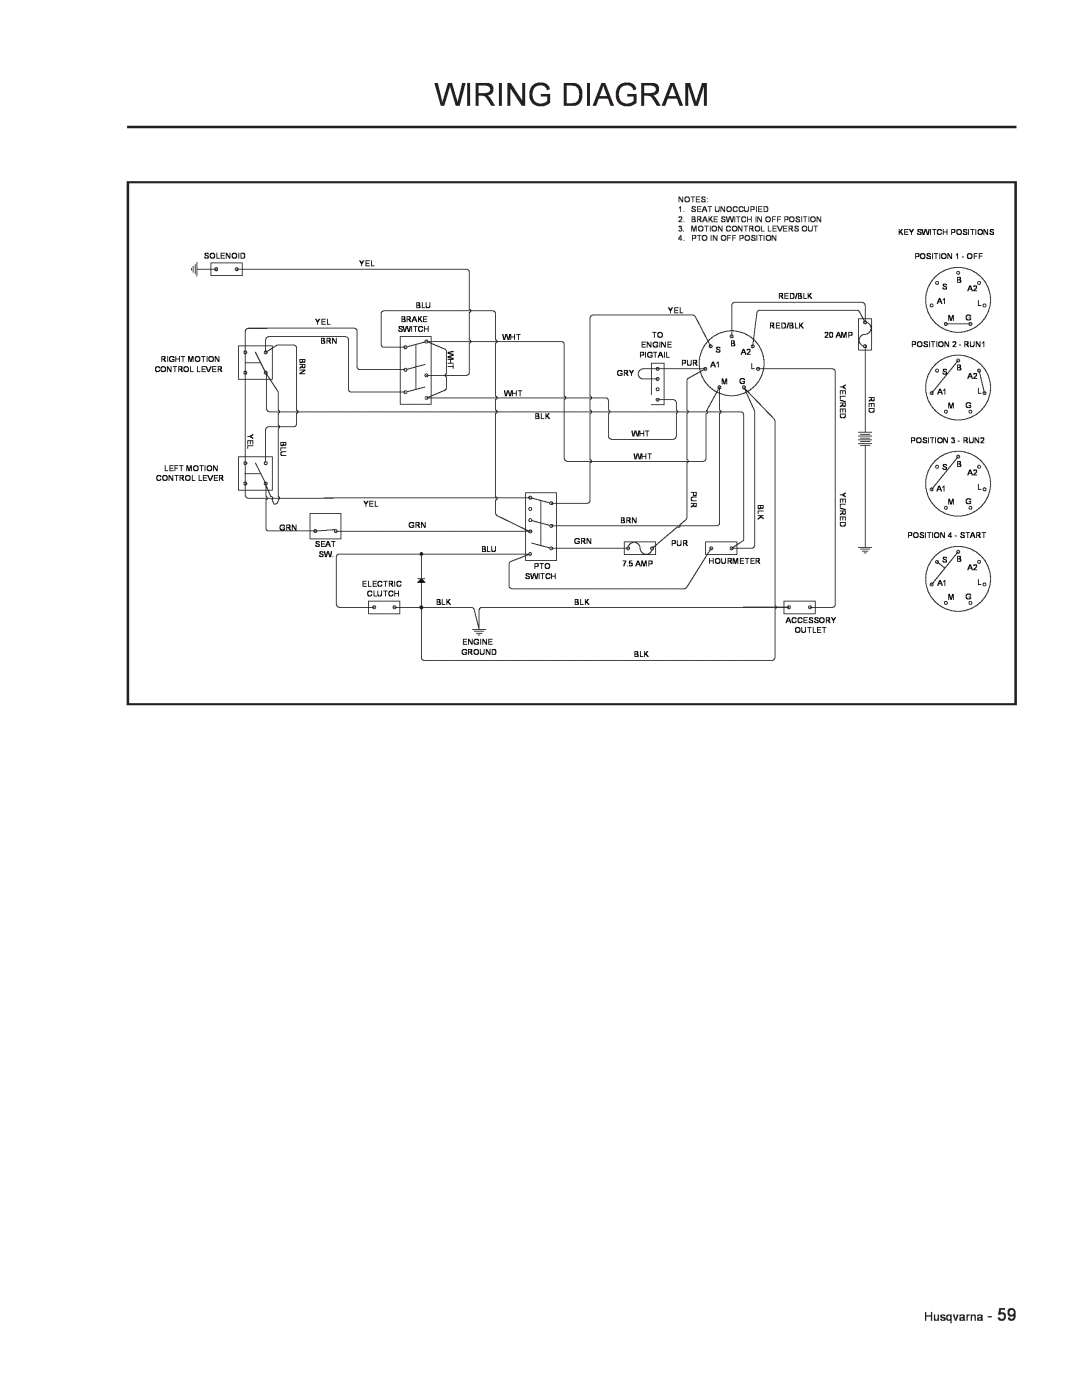 HTC LZC5225 / 965879601 manual Wiring Diagram, Key Switch Positions, POSITION 1 - OFF, Right Motion, Left Motion 